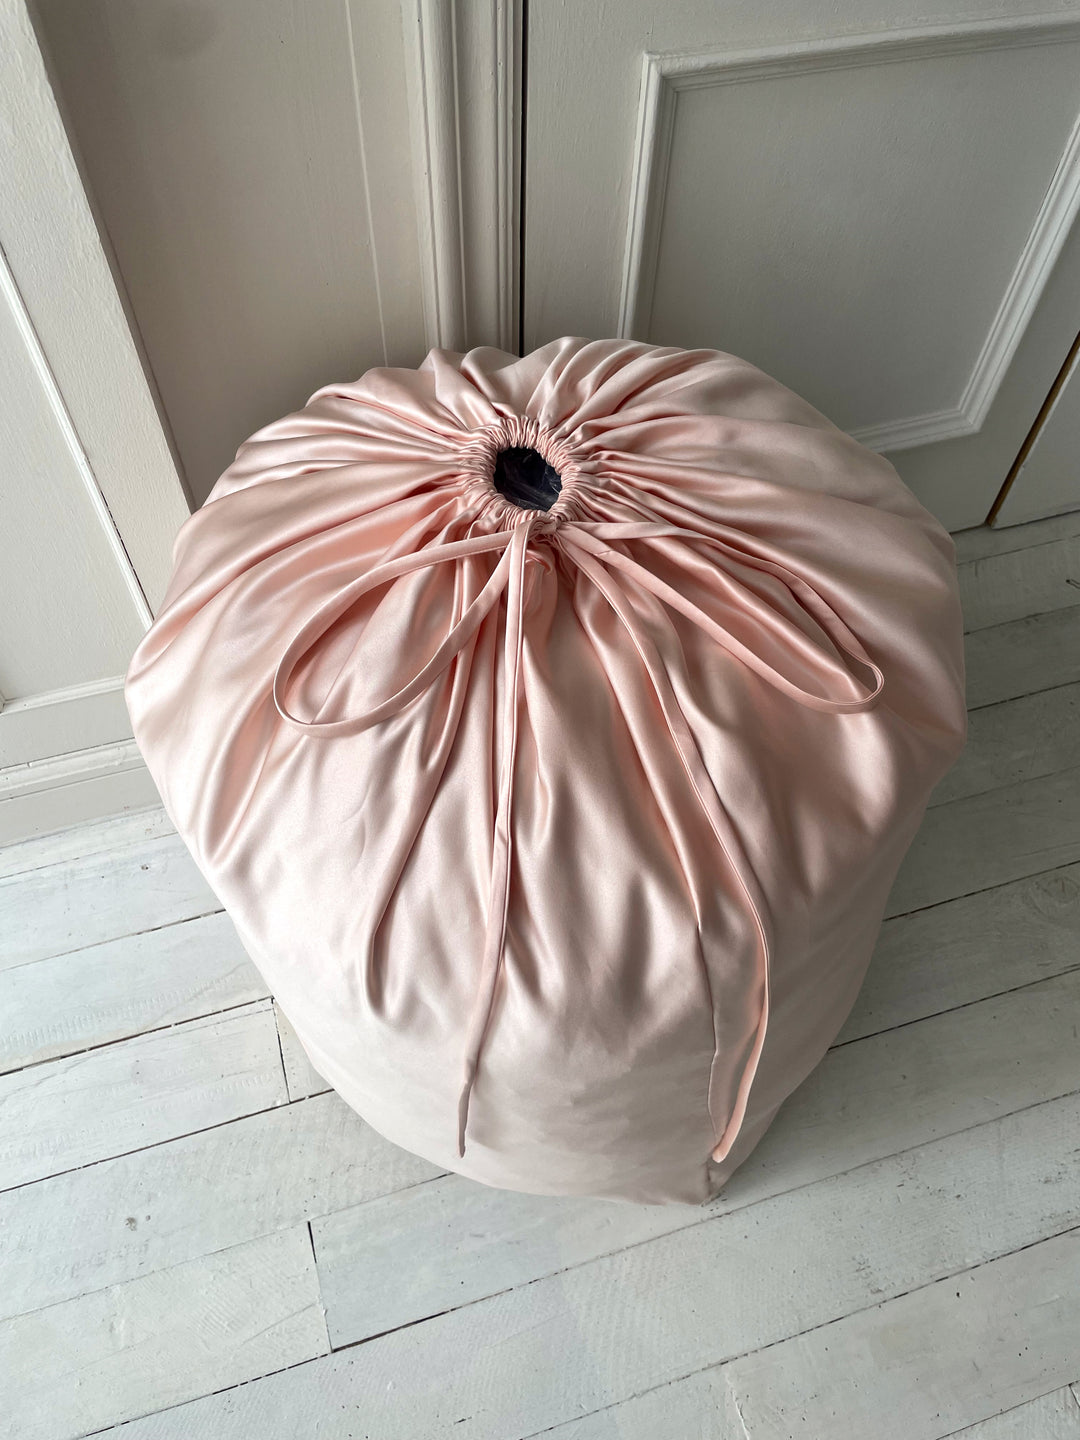 Giant Gown Storage Bag